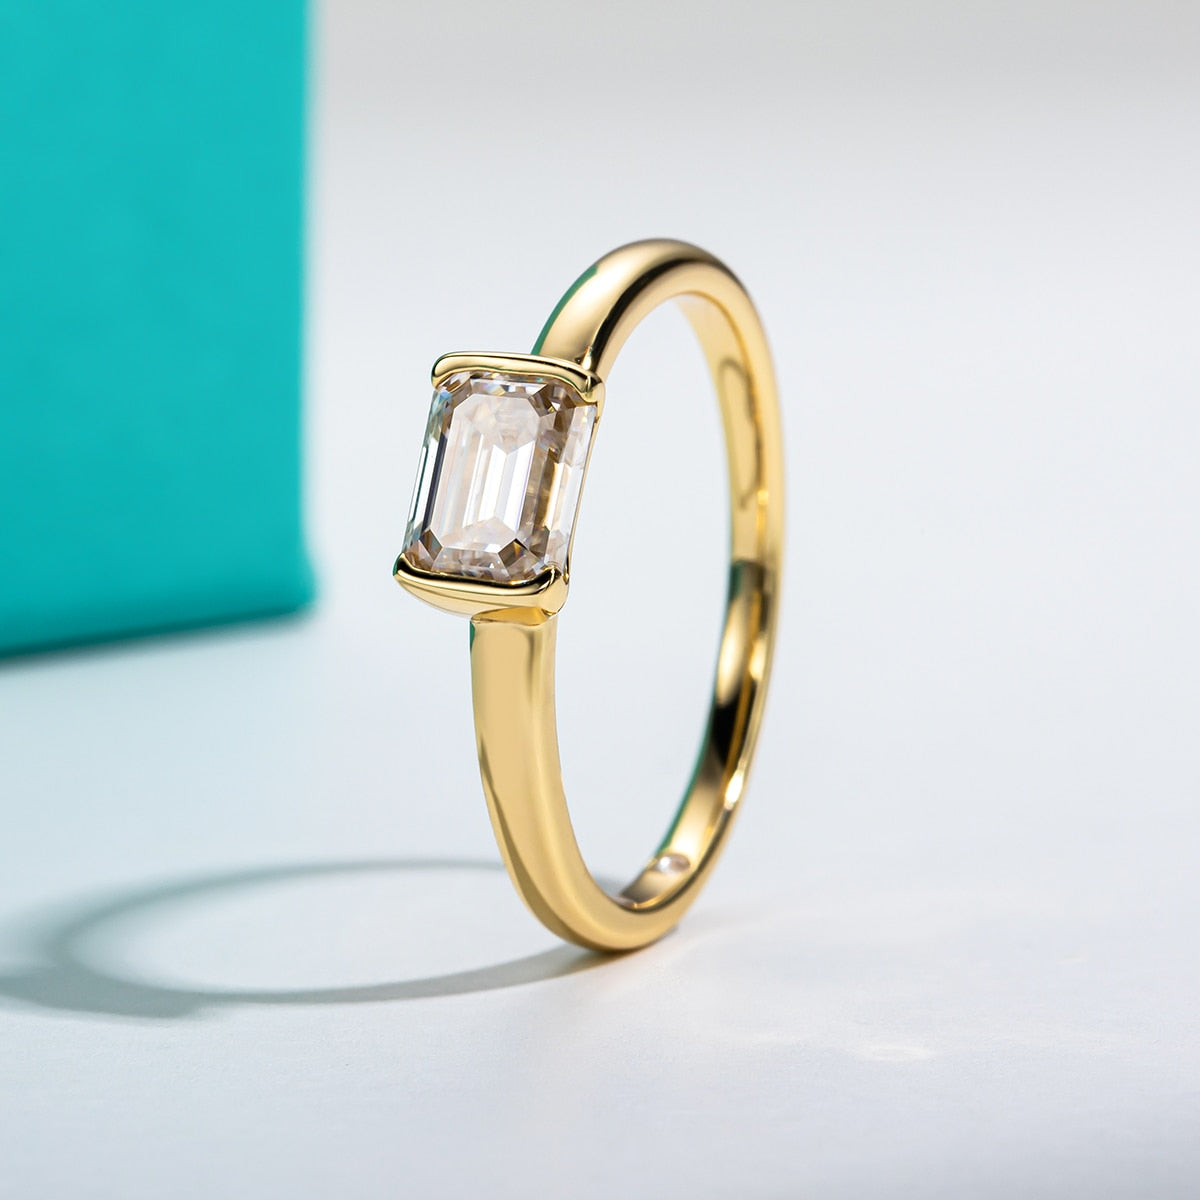 A gold tone ring set with a emerald cut moissanite set east to west in a tension bar setting.